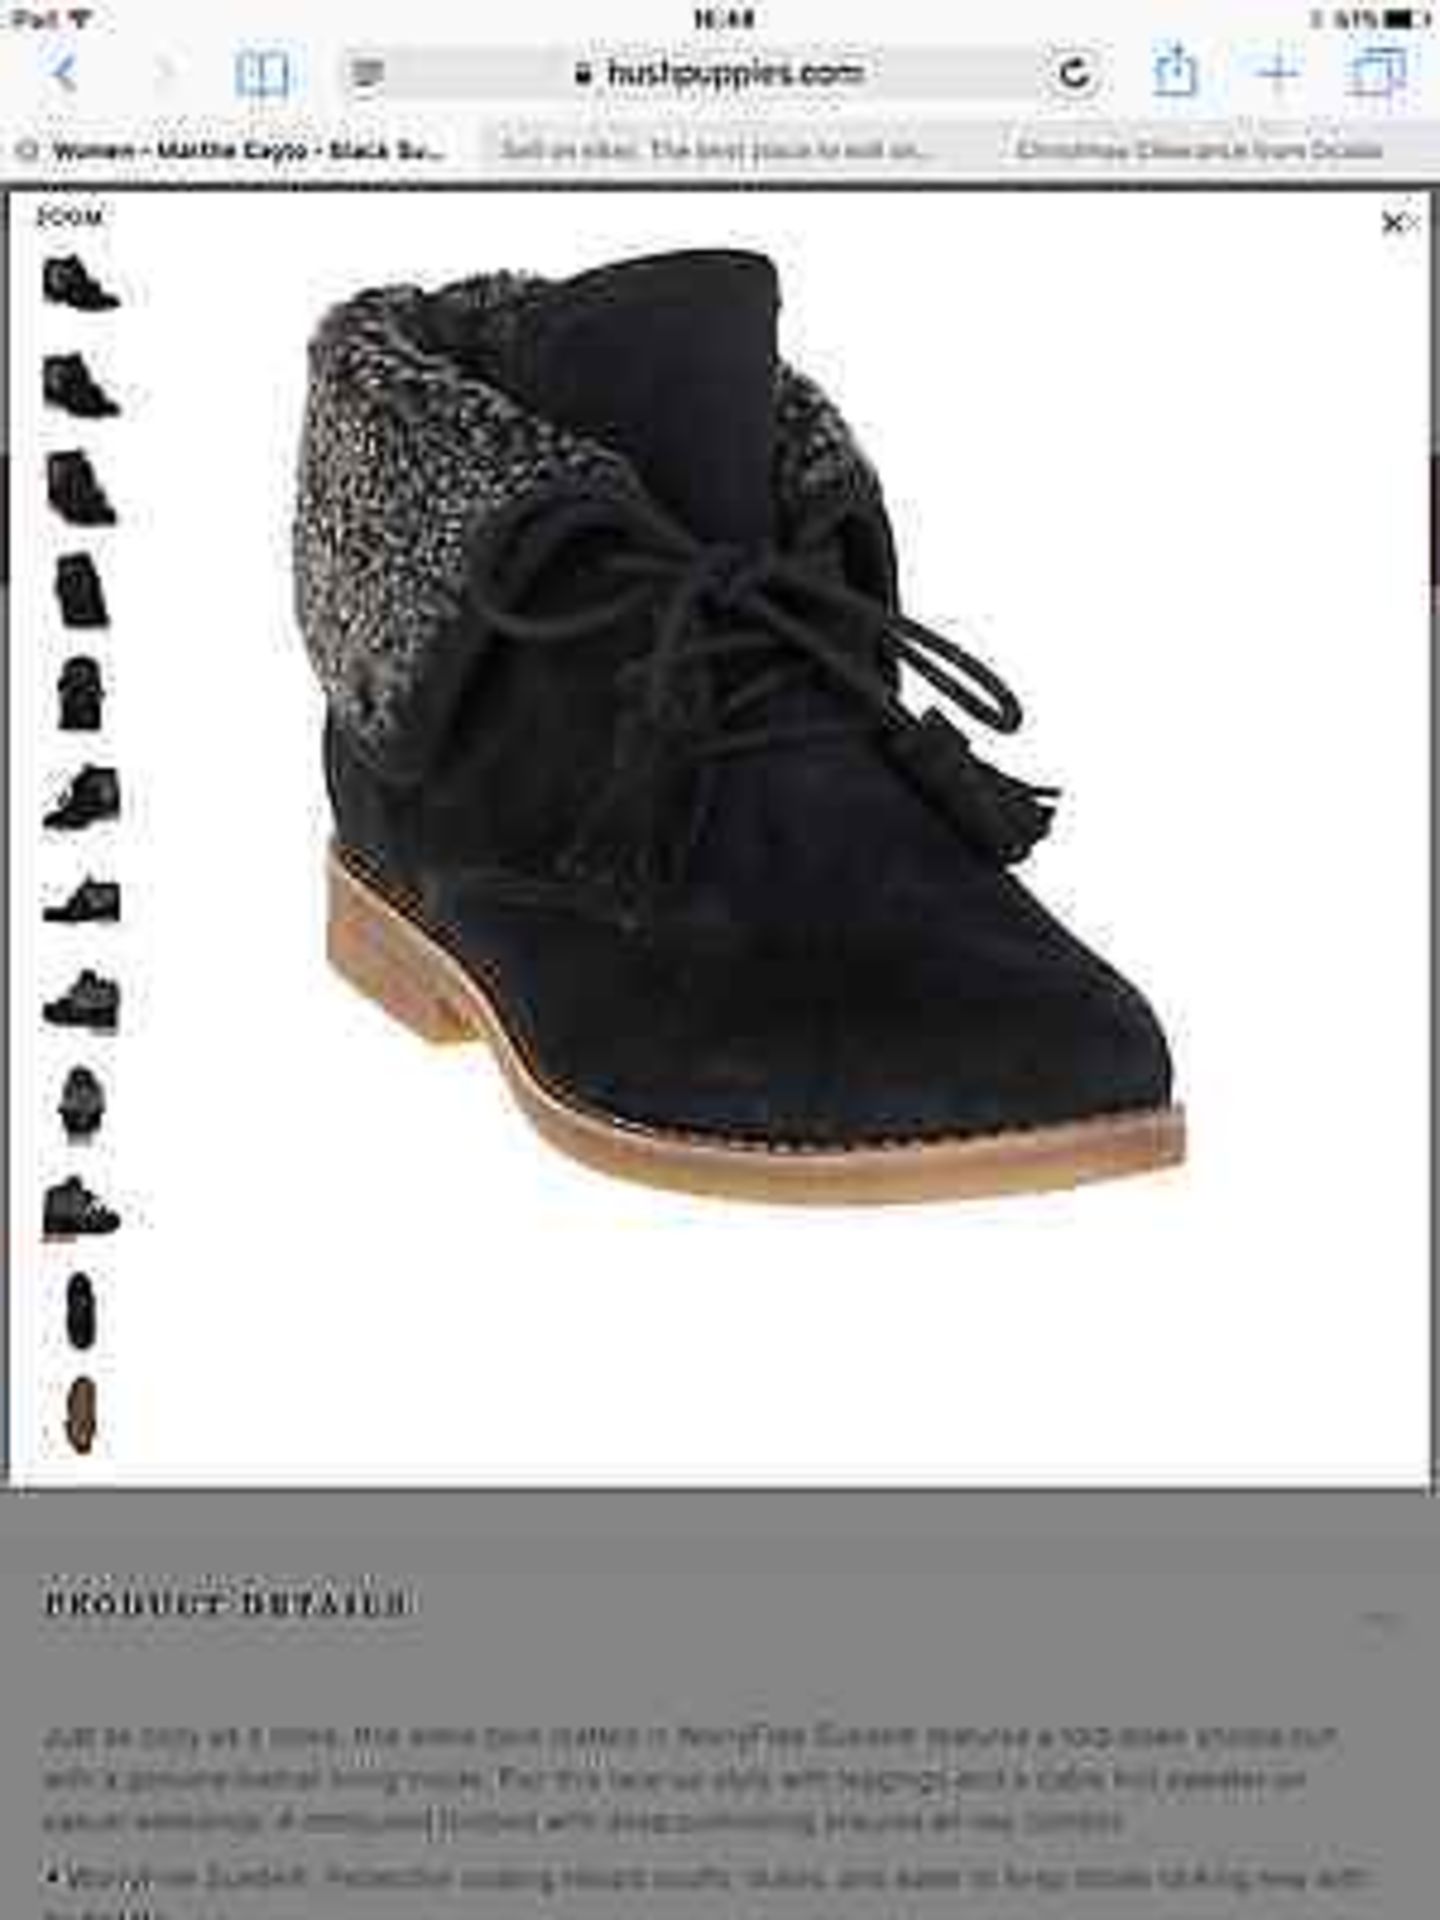 Hush Puppies Black Suede Martha Cayto Ankle Boot, Size UK 7, RRP £100 (New with box) [Ref: ] - Image 5 of 12